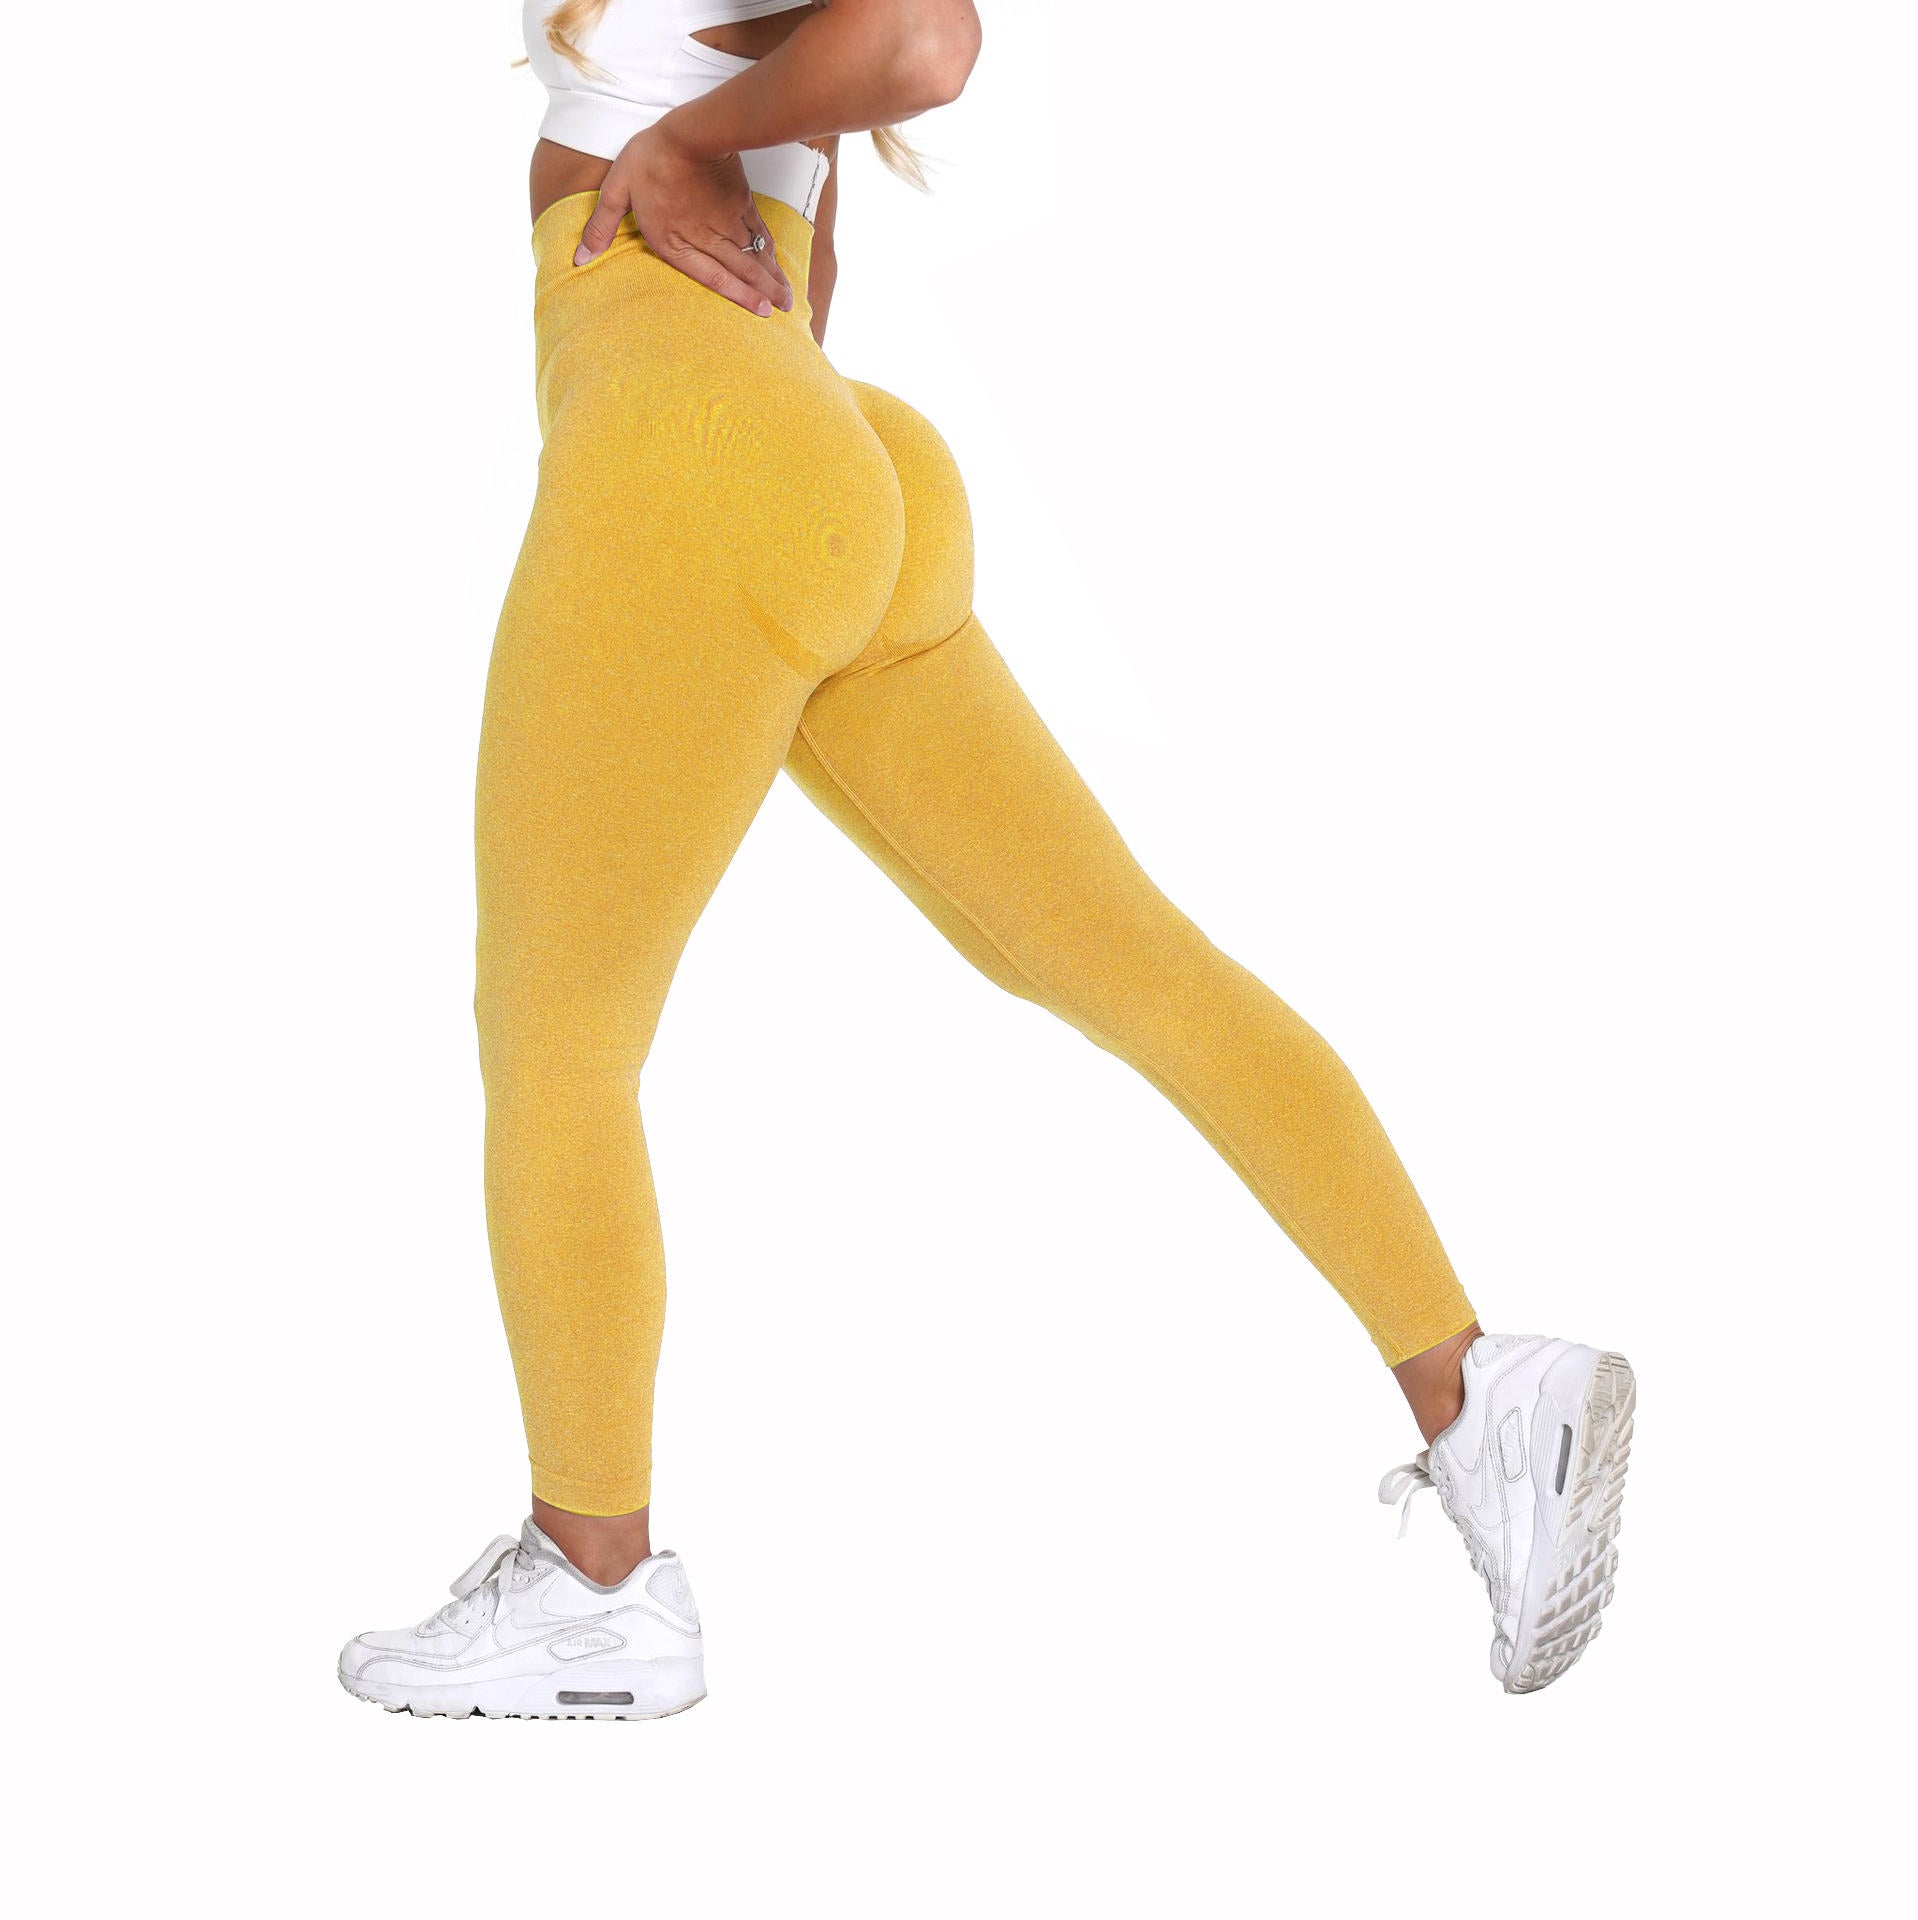  RFNIU Yellow Yoga Pants With Pockets For Women Hip Lifting Workout  Leggings Solid Color Tummy Control Tights Trouser : Sports & Outdoors